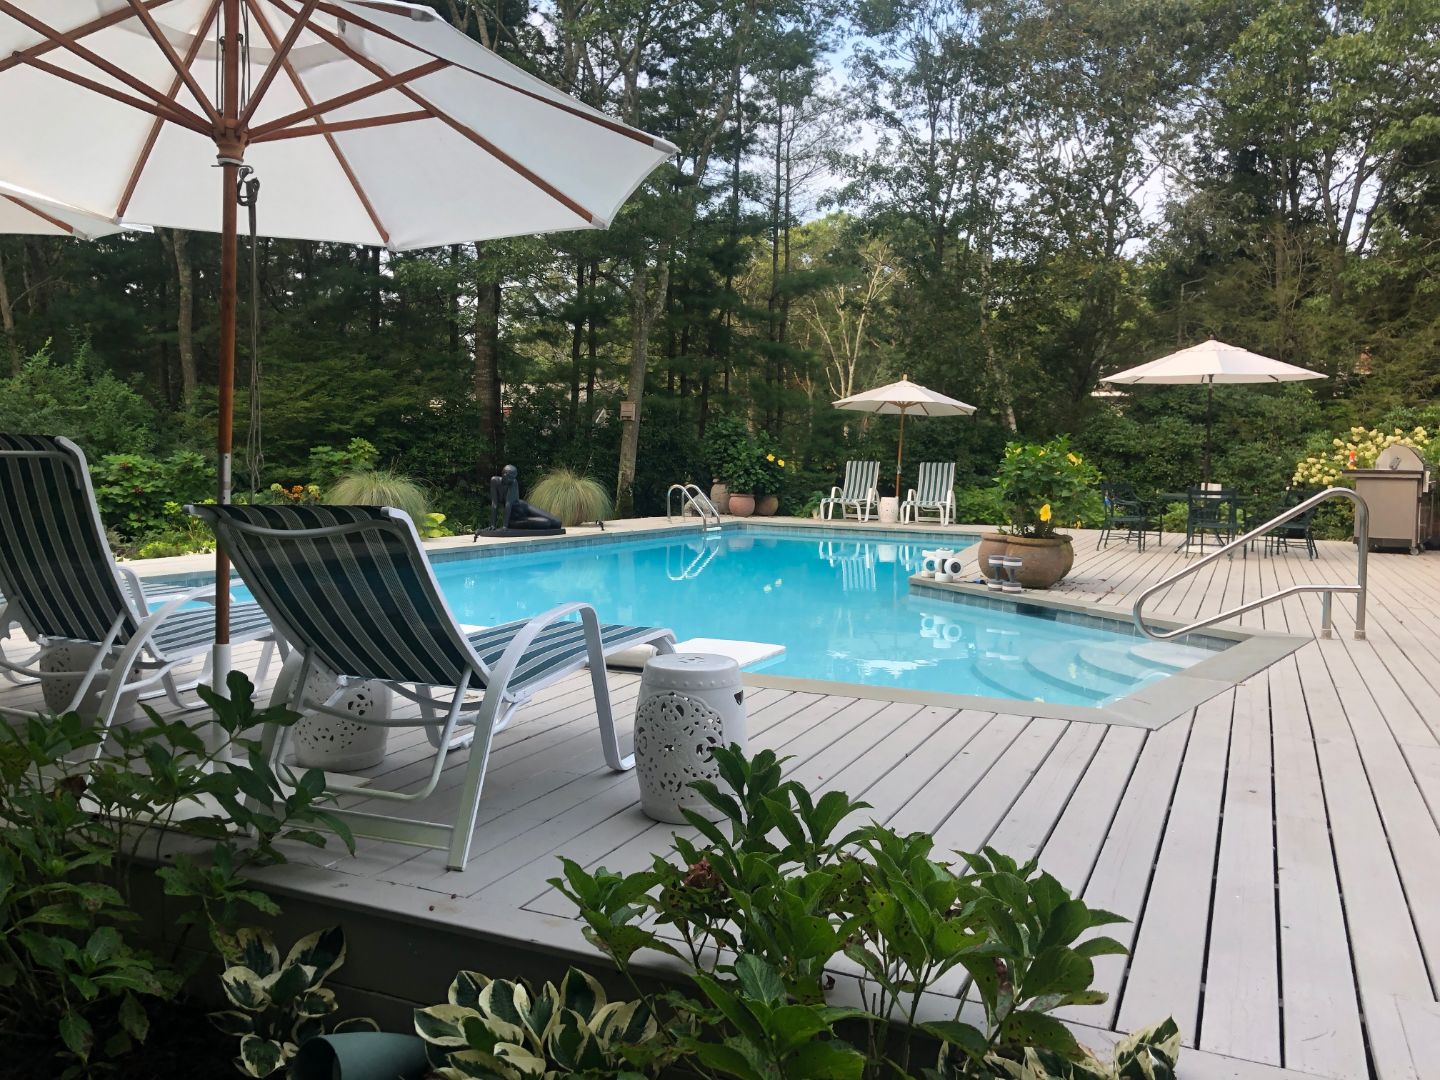 D&R Pool Service | The Hamptons Pool Company 3 Industrial Dr, Quogue New York 11959